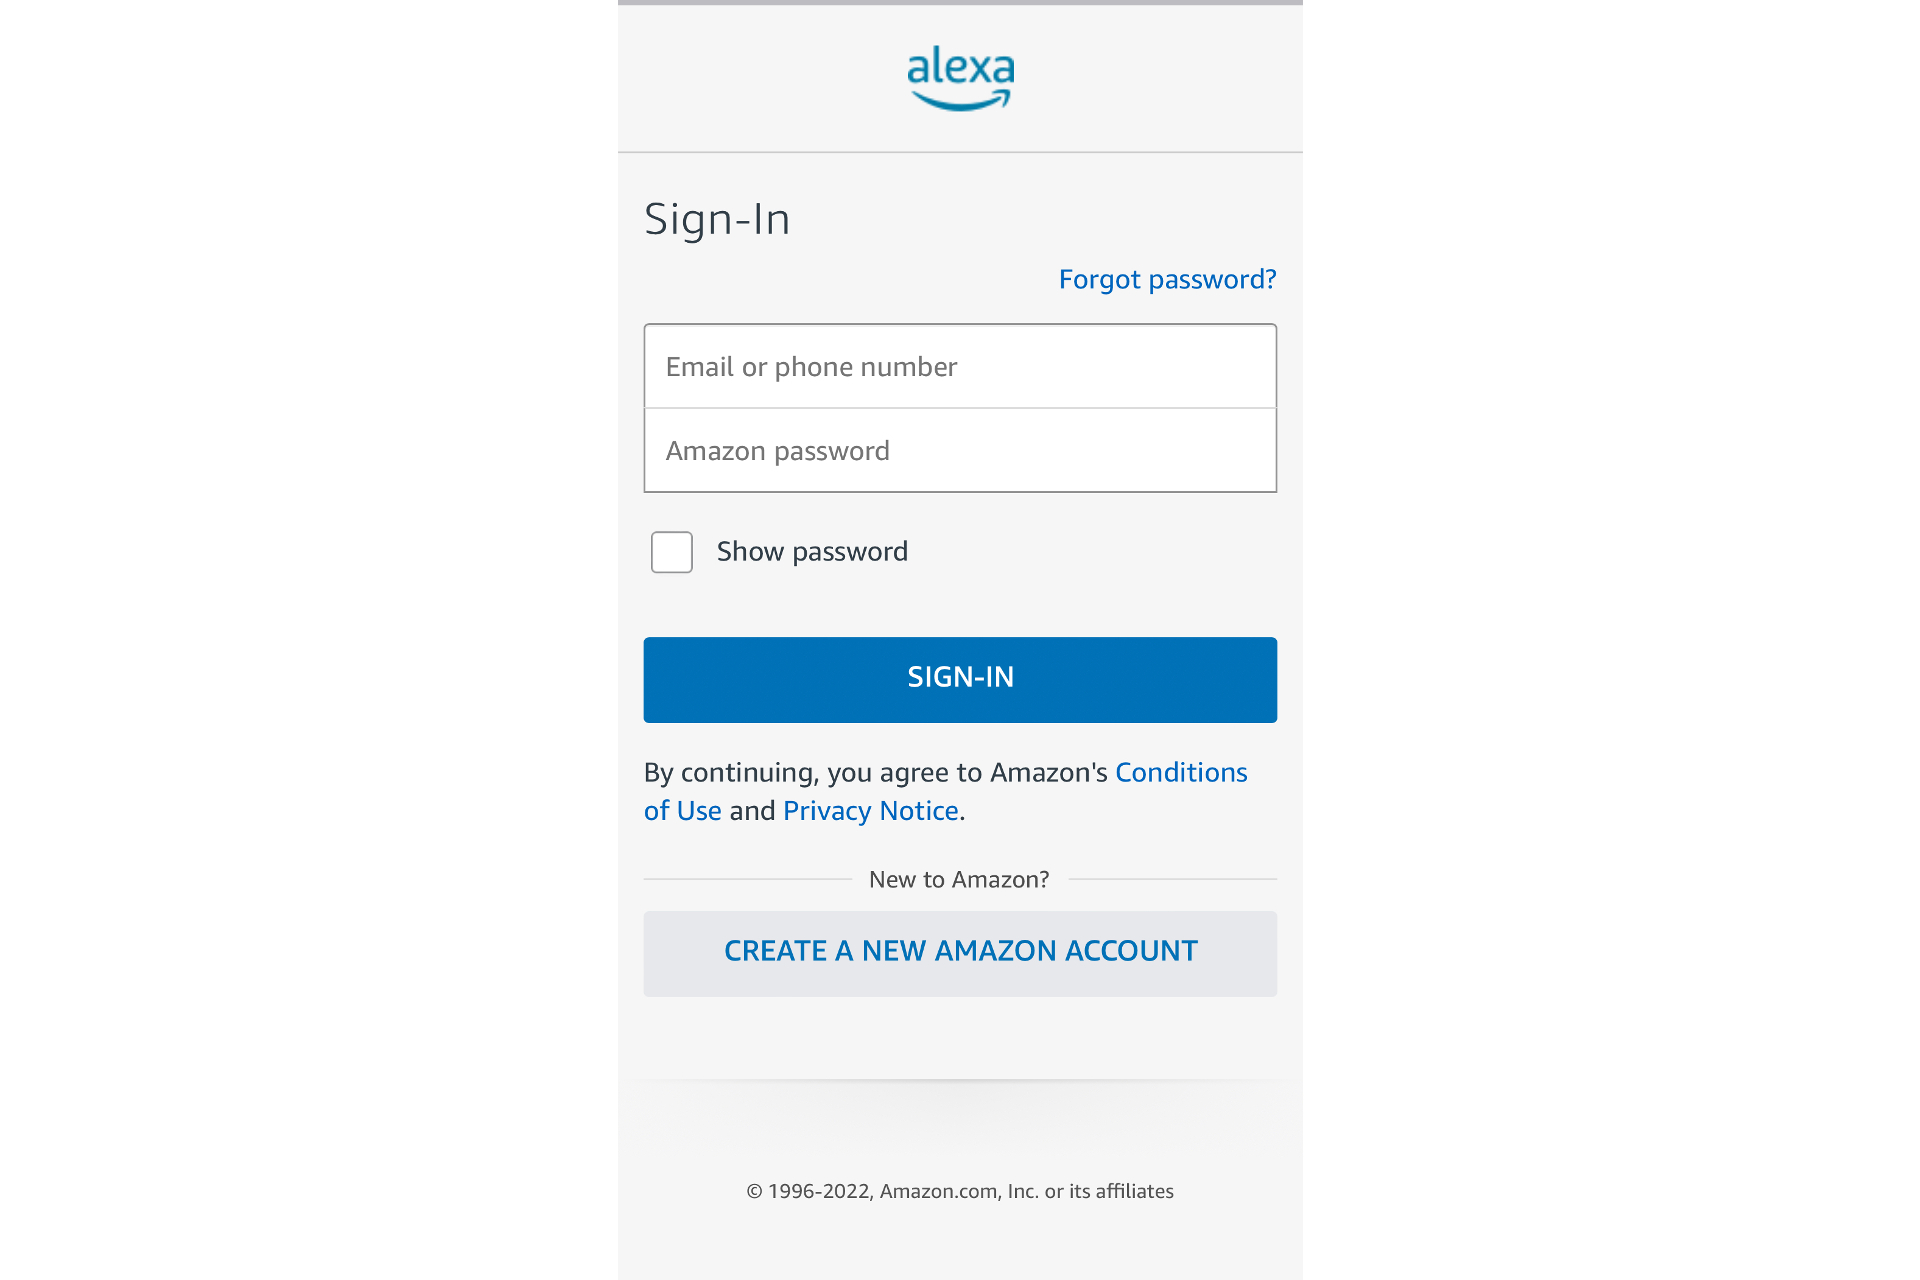 Sign Into Alexa on iPhone.